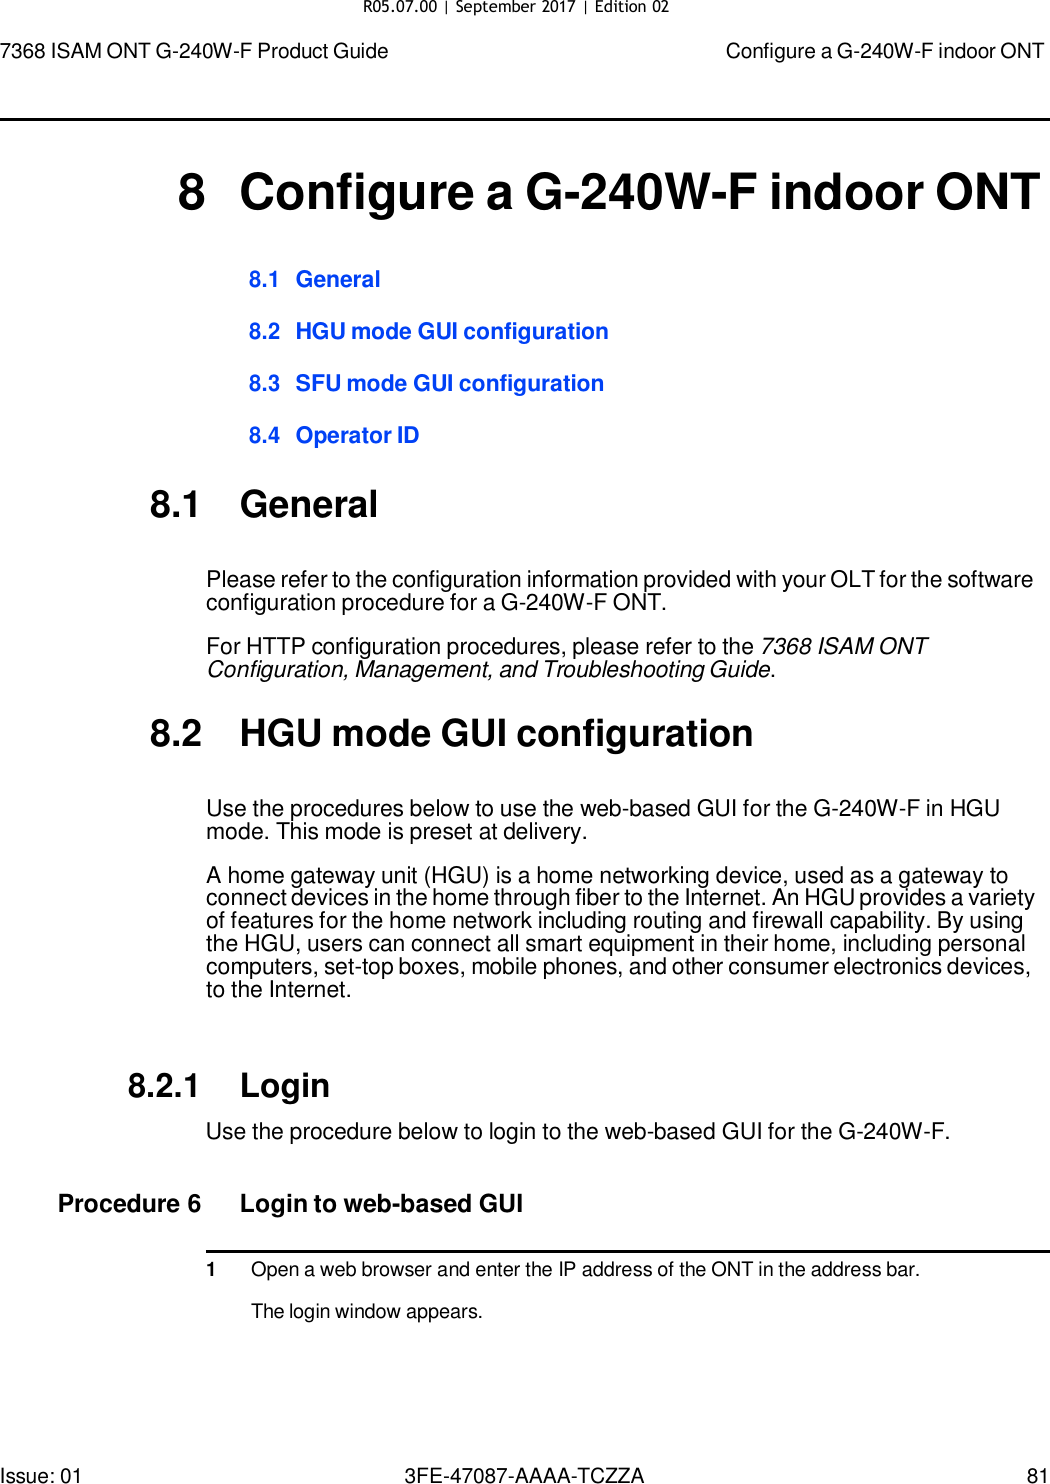 Page 75 of Nokia Bell G240WFV2 7368 ISAM GPON ONU User Manual 7368 ISAM ONT G 240W F Product Guide